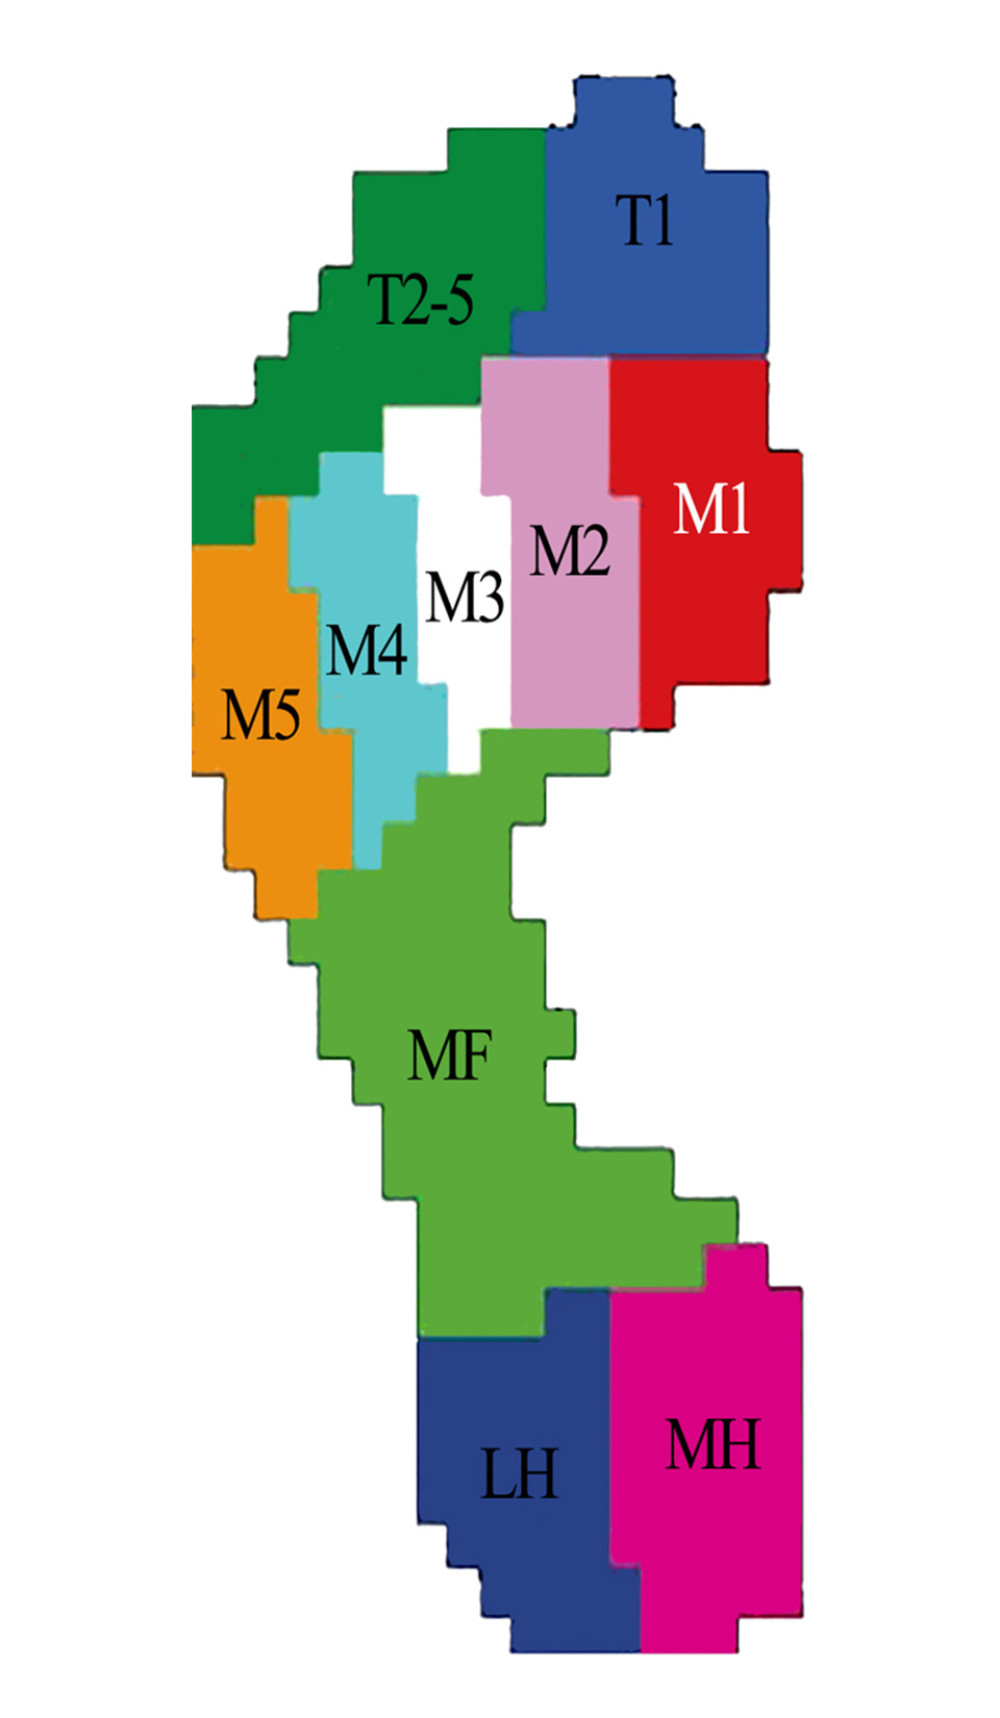 Schematic diagram of dynamic plantar pressure masked zones.The 10 masked zones include: hallux (T1), toes 2–5 (T2–5), first to fifth metatarsals (M1, M2, M3, M4, and M5), midfoot (MF), medial heel (MH), and lateral heel (LH).